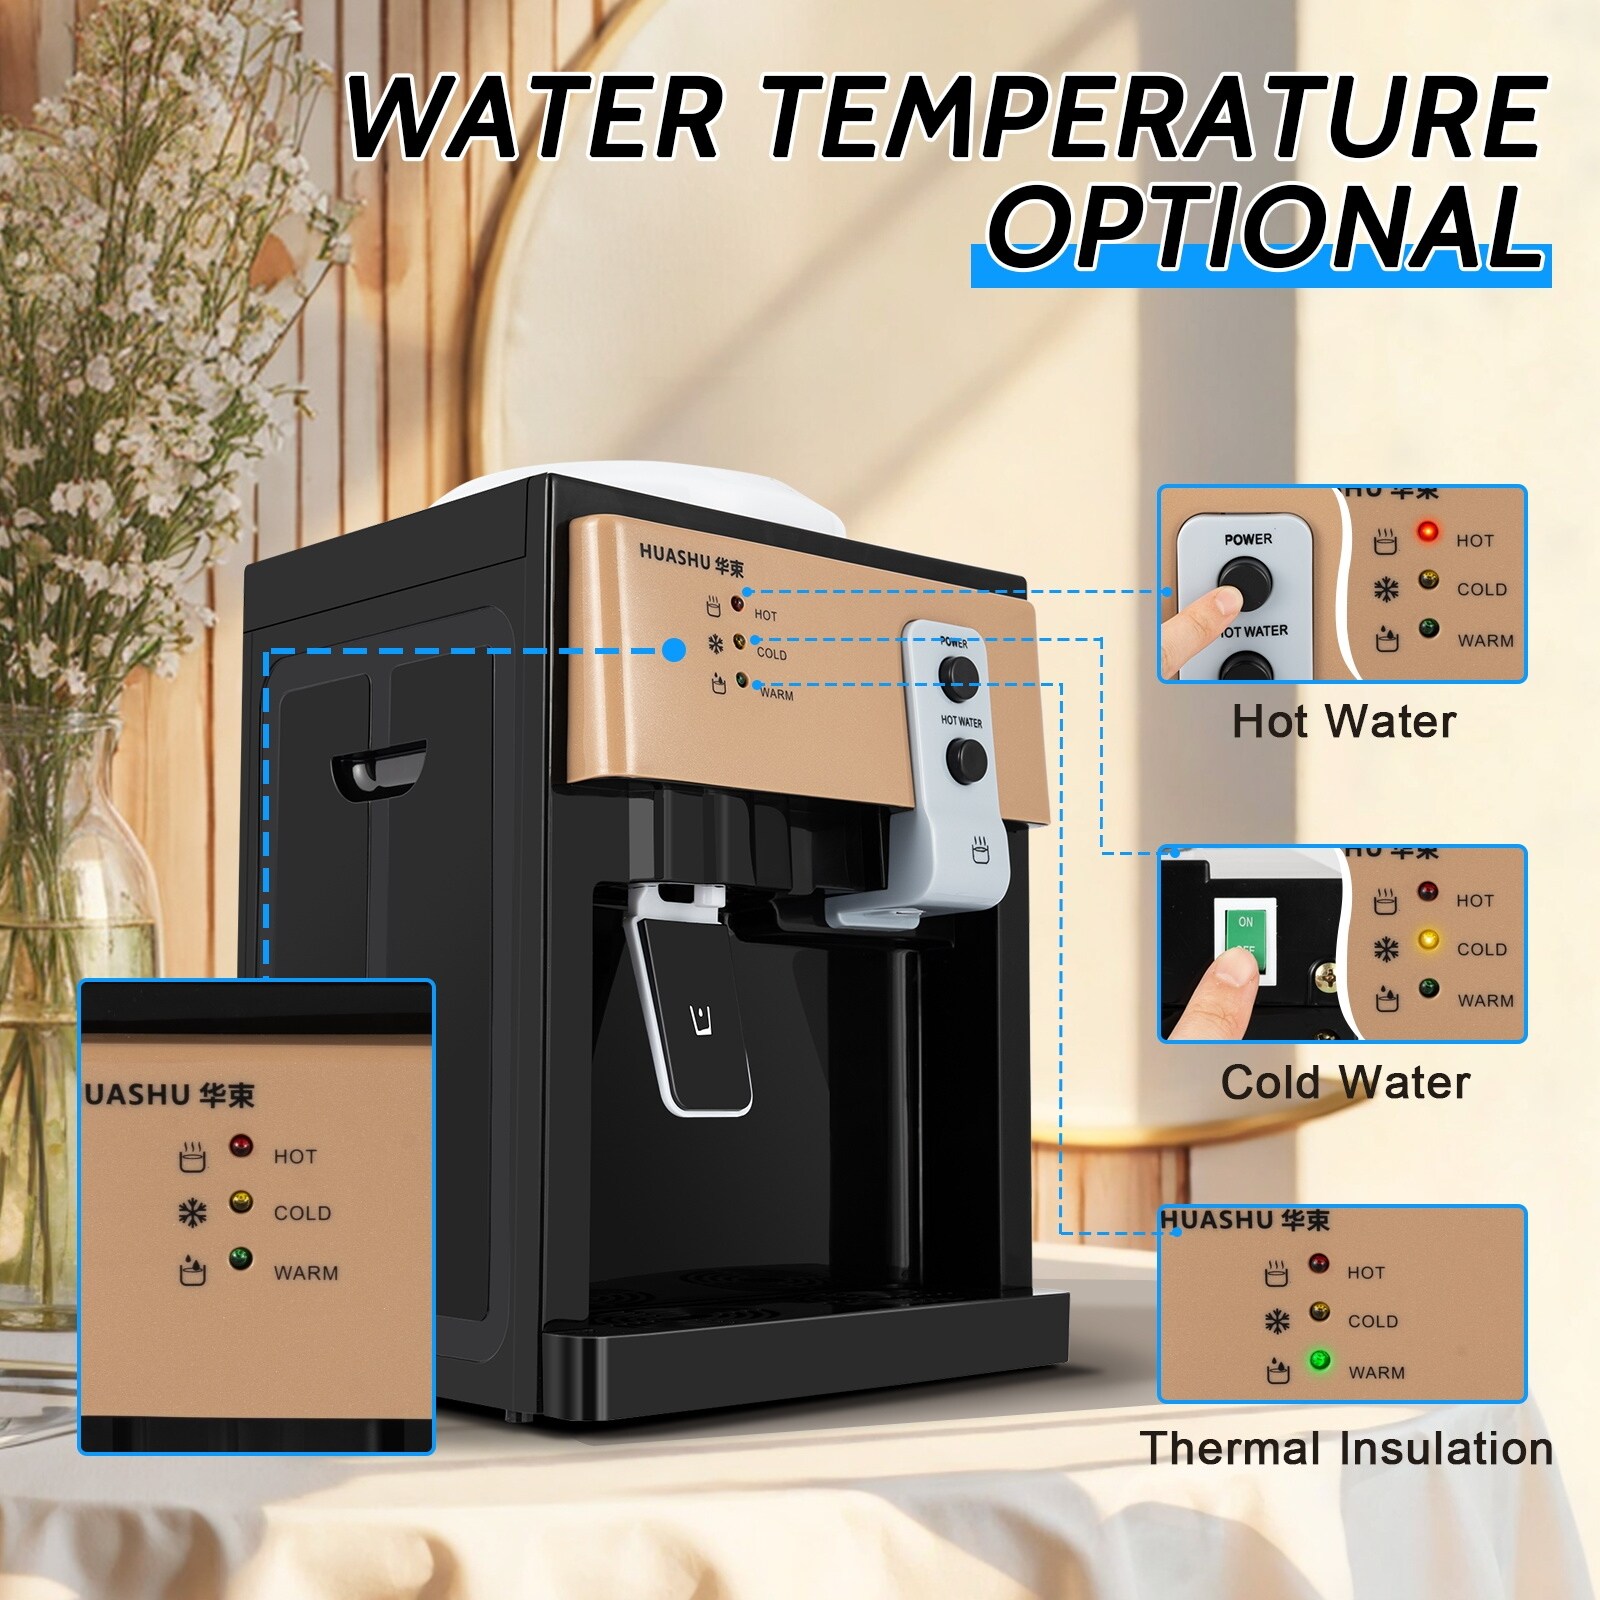 https://ak1.ostkcdn.com/images/products/is/images/direct/e84b9065280d68e72ddb6d99db3de10833828916/Electric-Hot-and-Cold-Water-Cooler-Dispenser-for-Home-Office-Use-110V.jpg